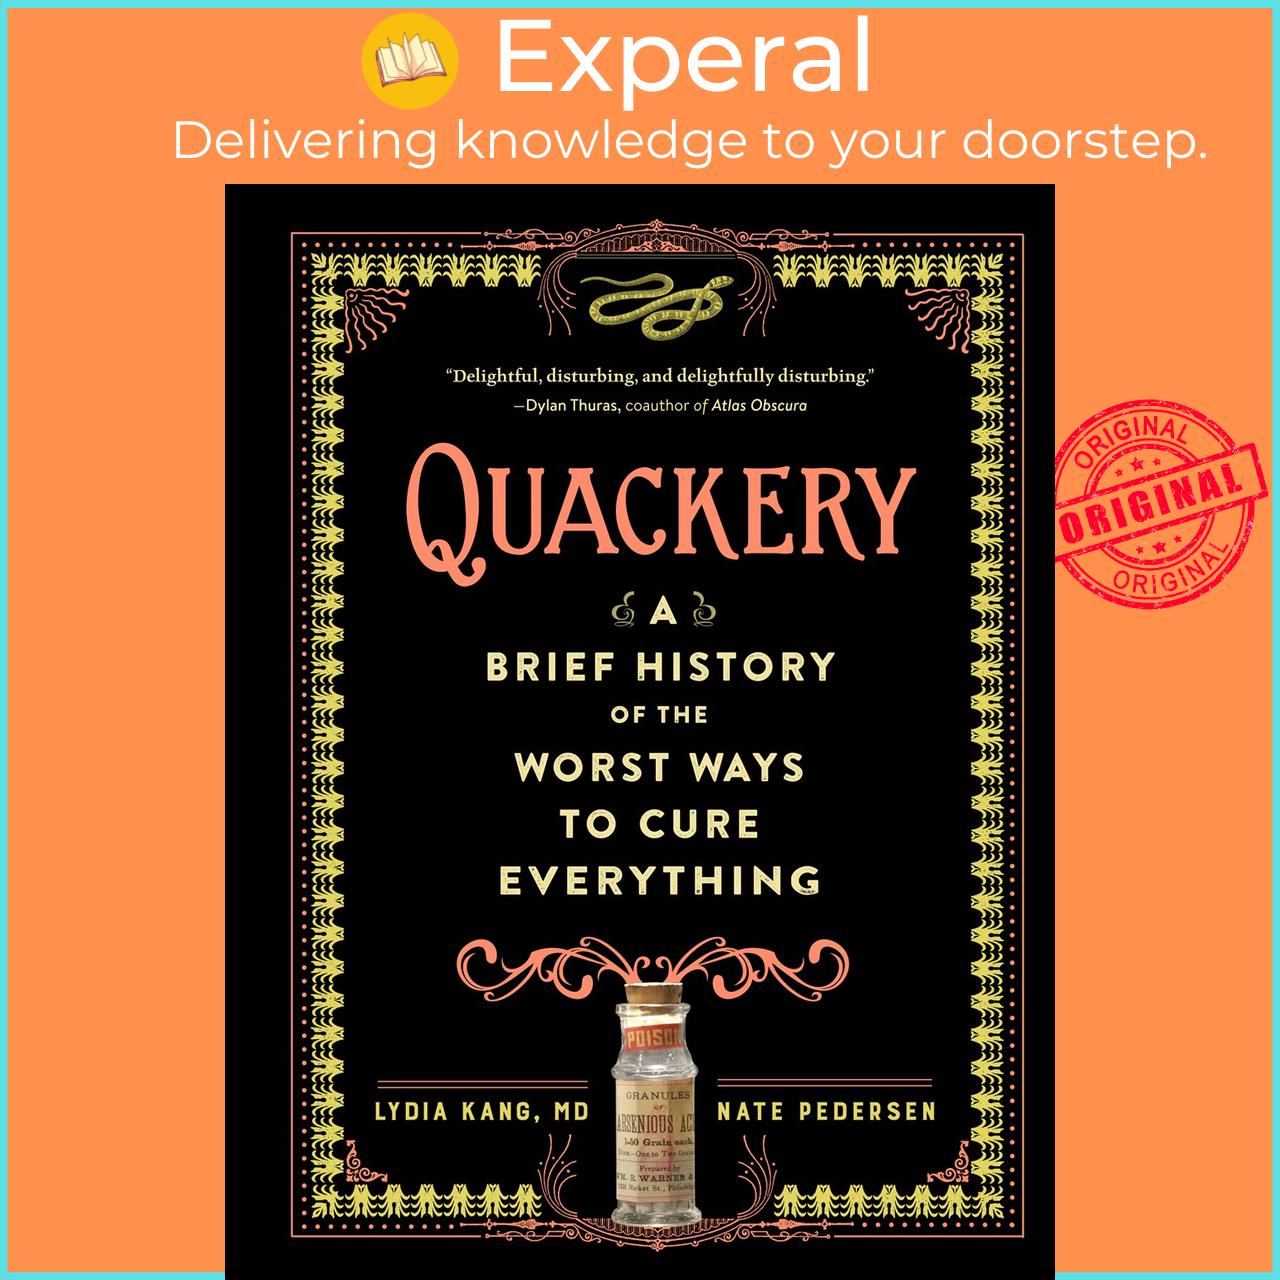 Sách - Quackery : A Brief History of the Worst Ways to Cure Everything by Lydia Kang (US edition, hardcover)